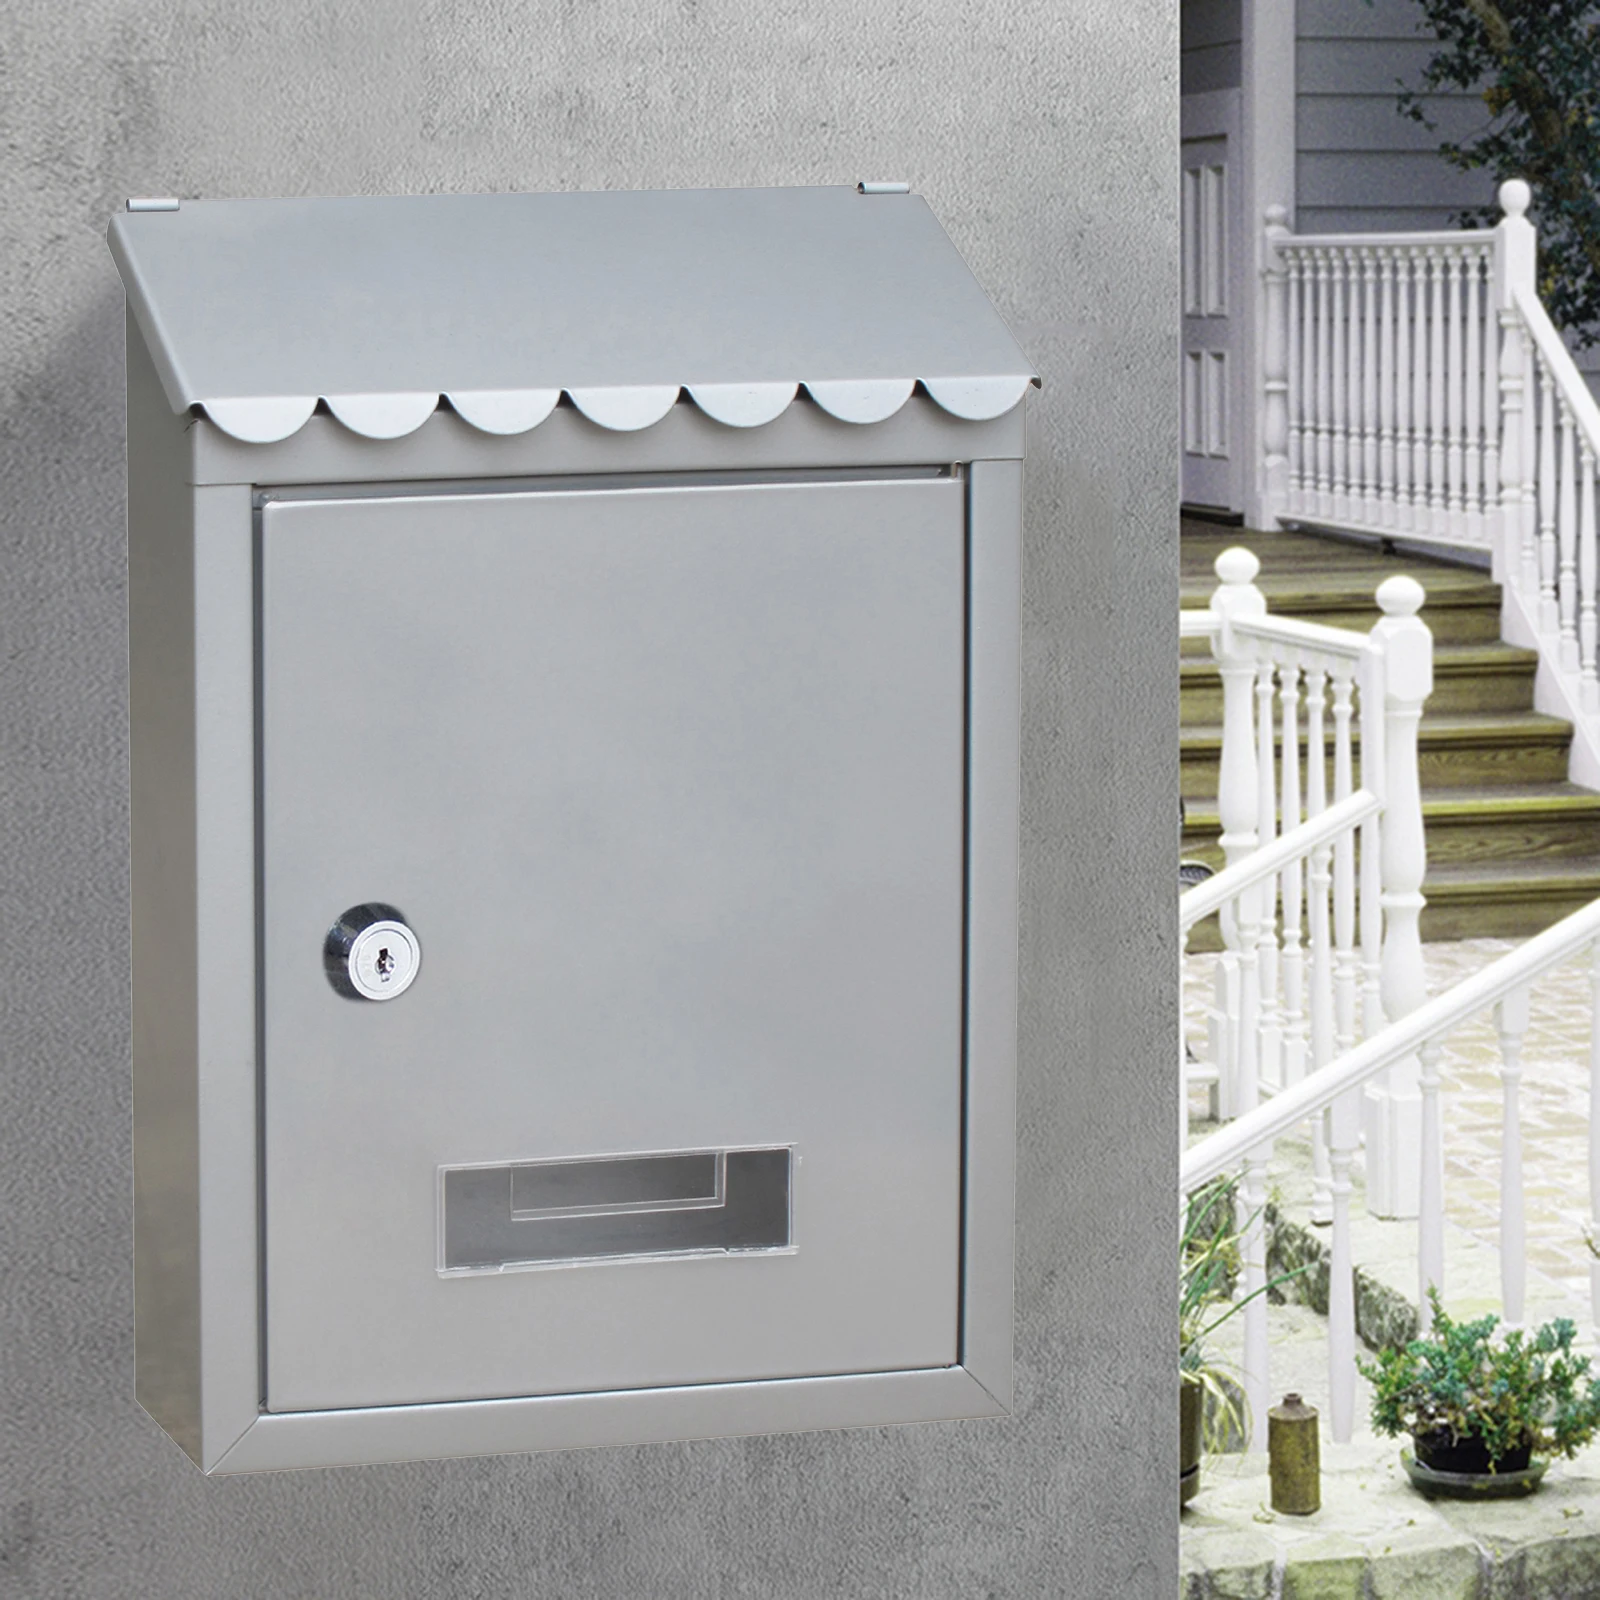 Mailbox Letterbox Wall Mount Mail Secure Mail Box 2 Keys Home Decorative